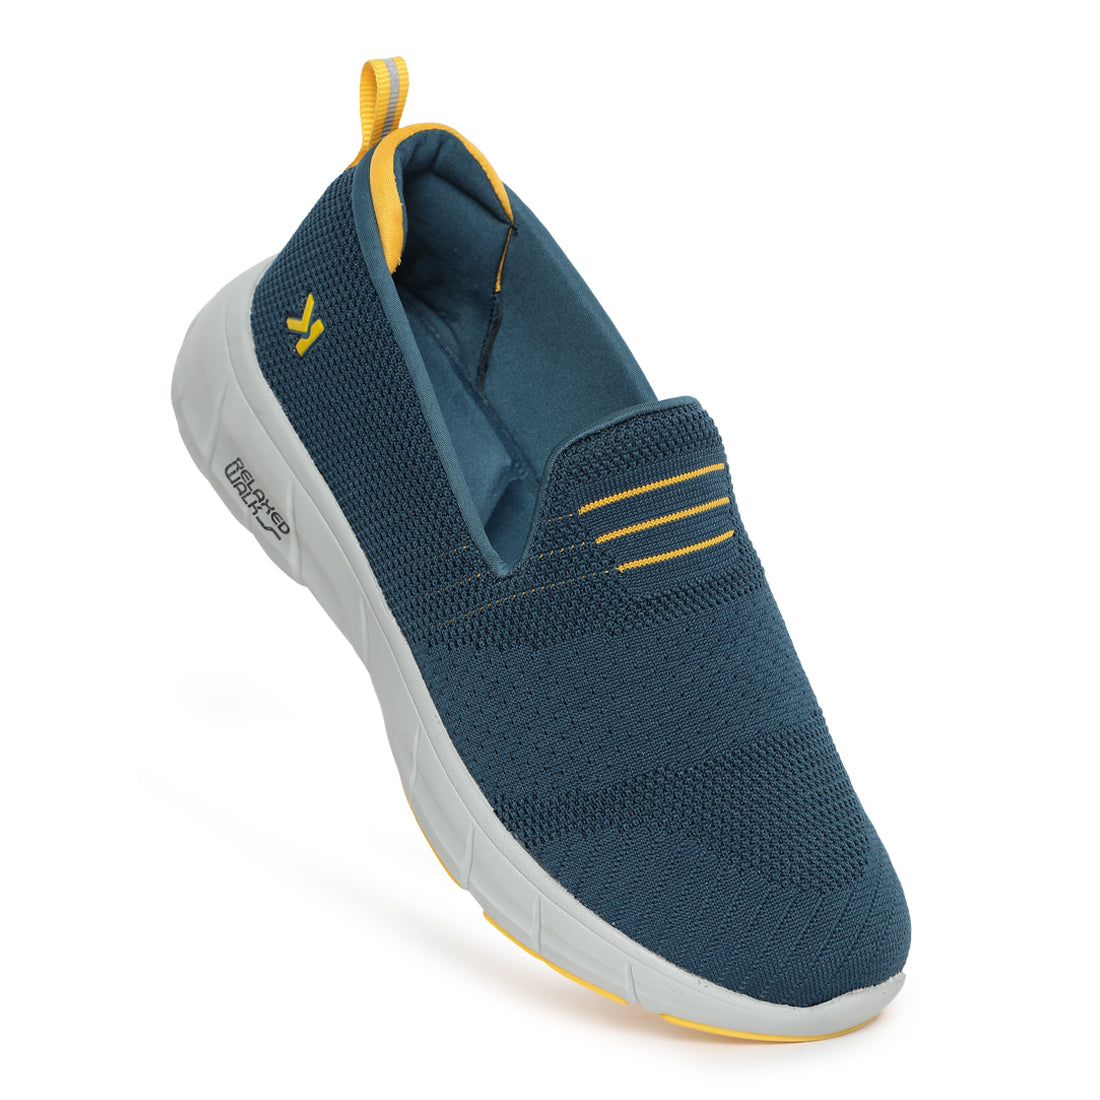 Eeken ESHGIA104 Teal Blue And Yellow Athleisure Shoes For Men